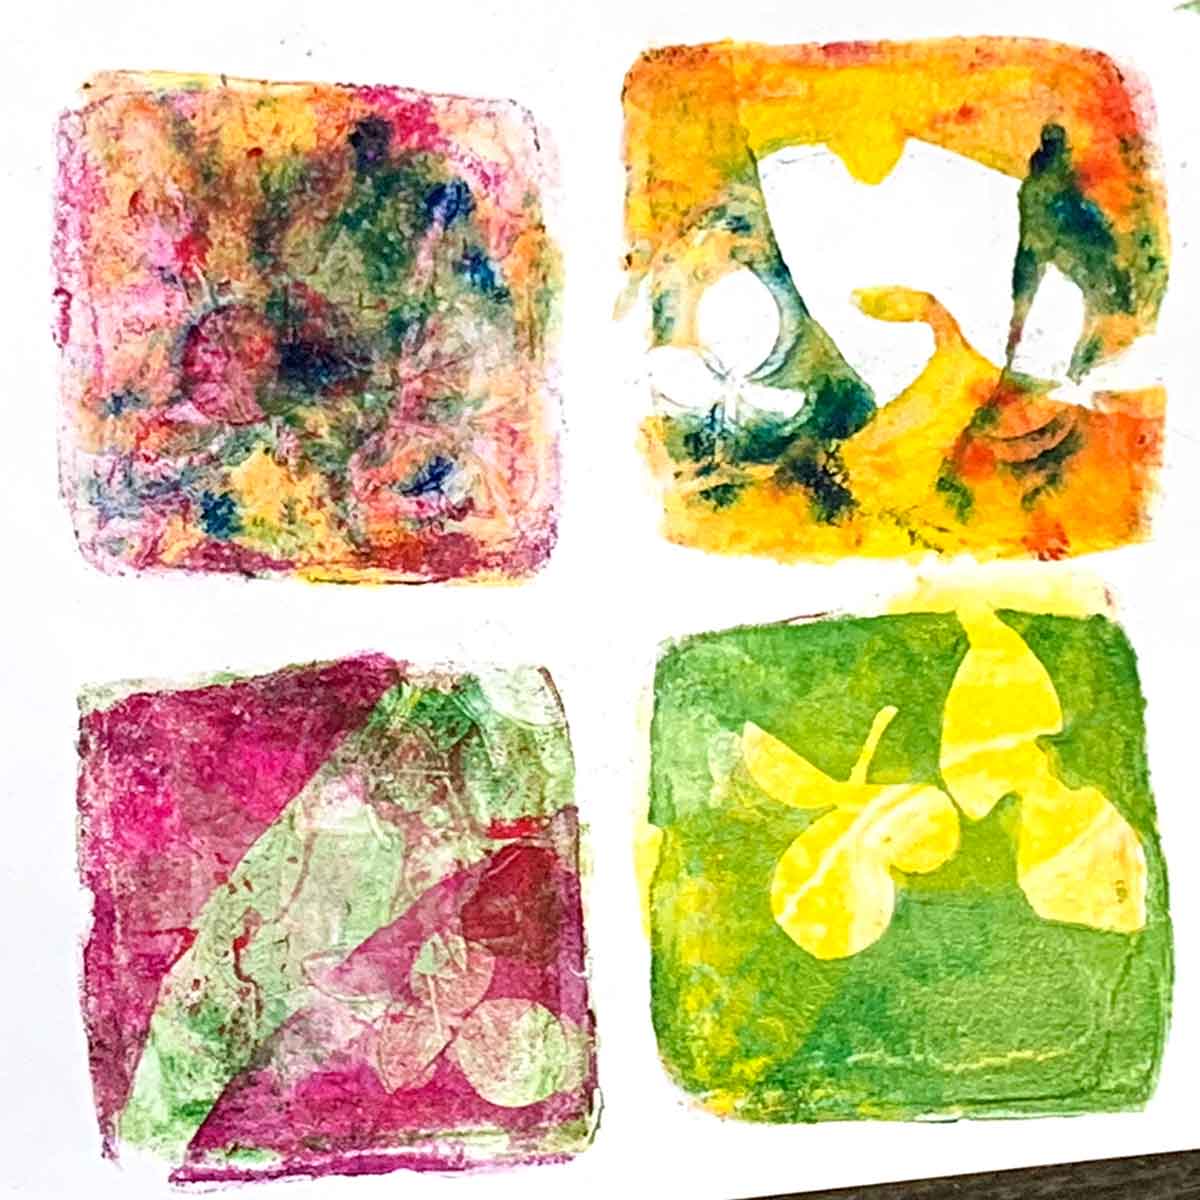 GEL PRINT & PRINTMAKING ~ Dive into gelli printed papers, mono tape  printmaking, and collagraph plates.